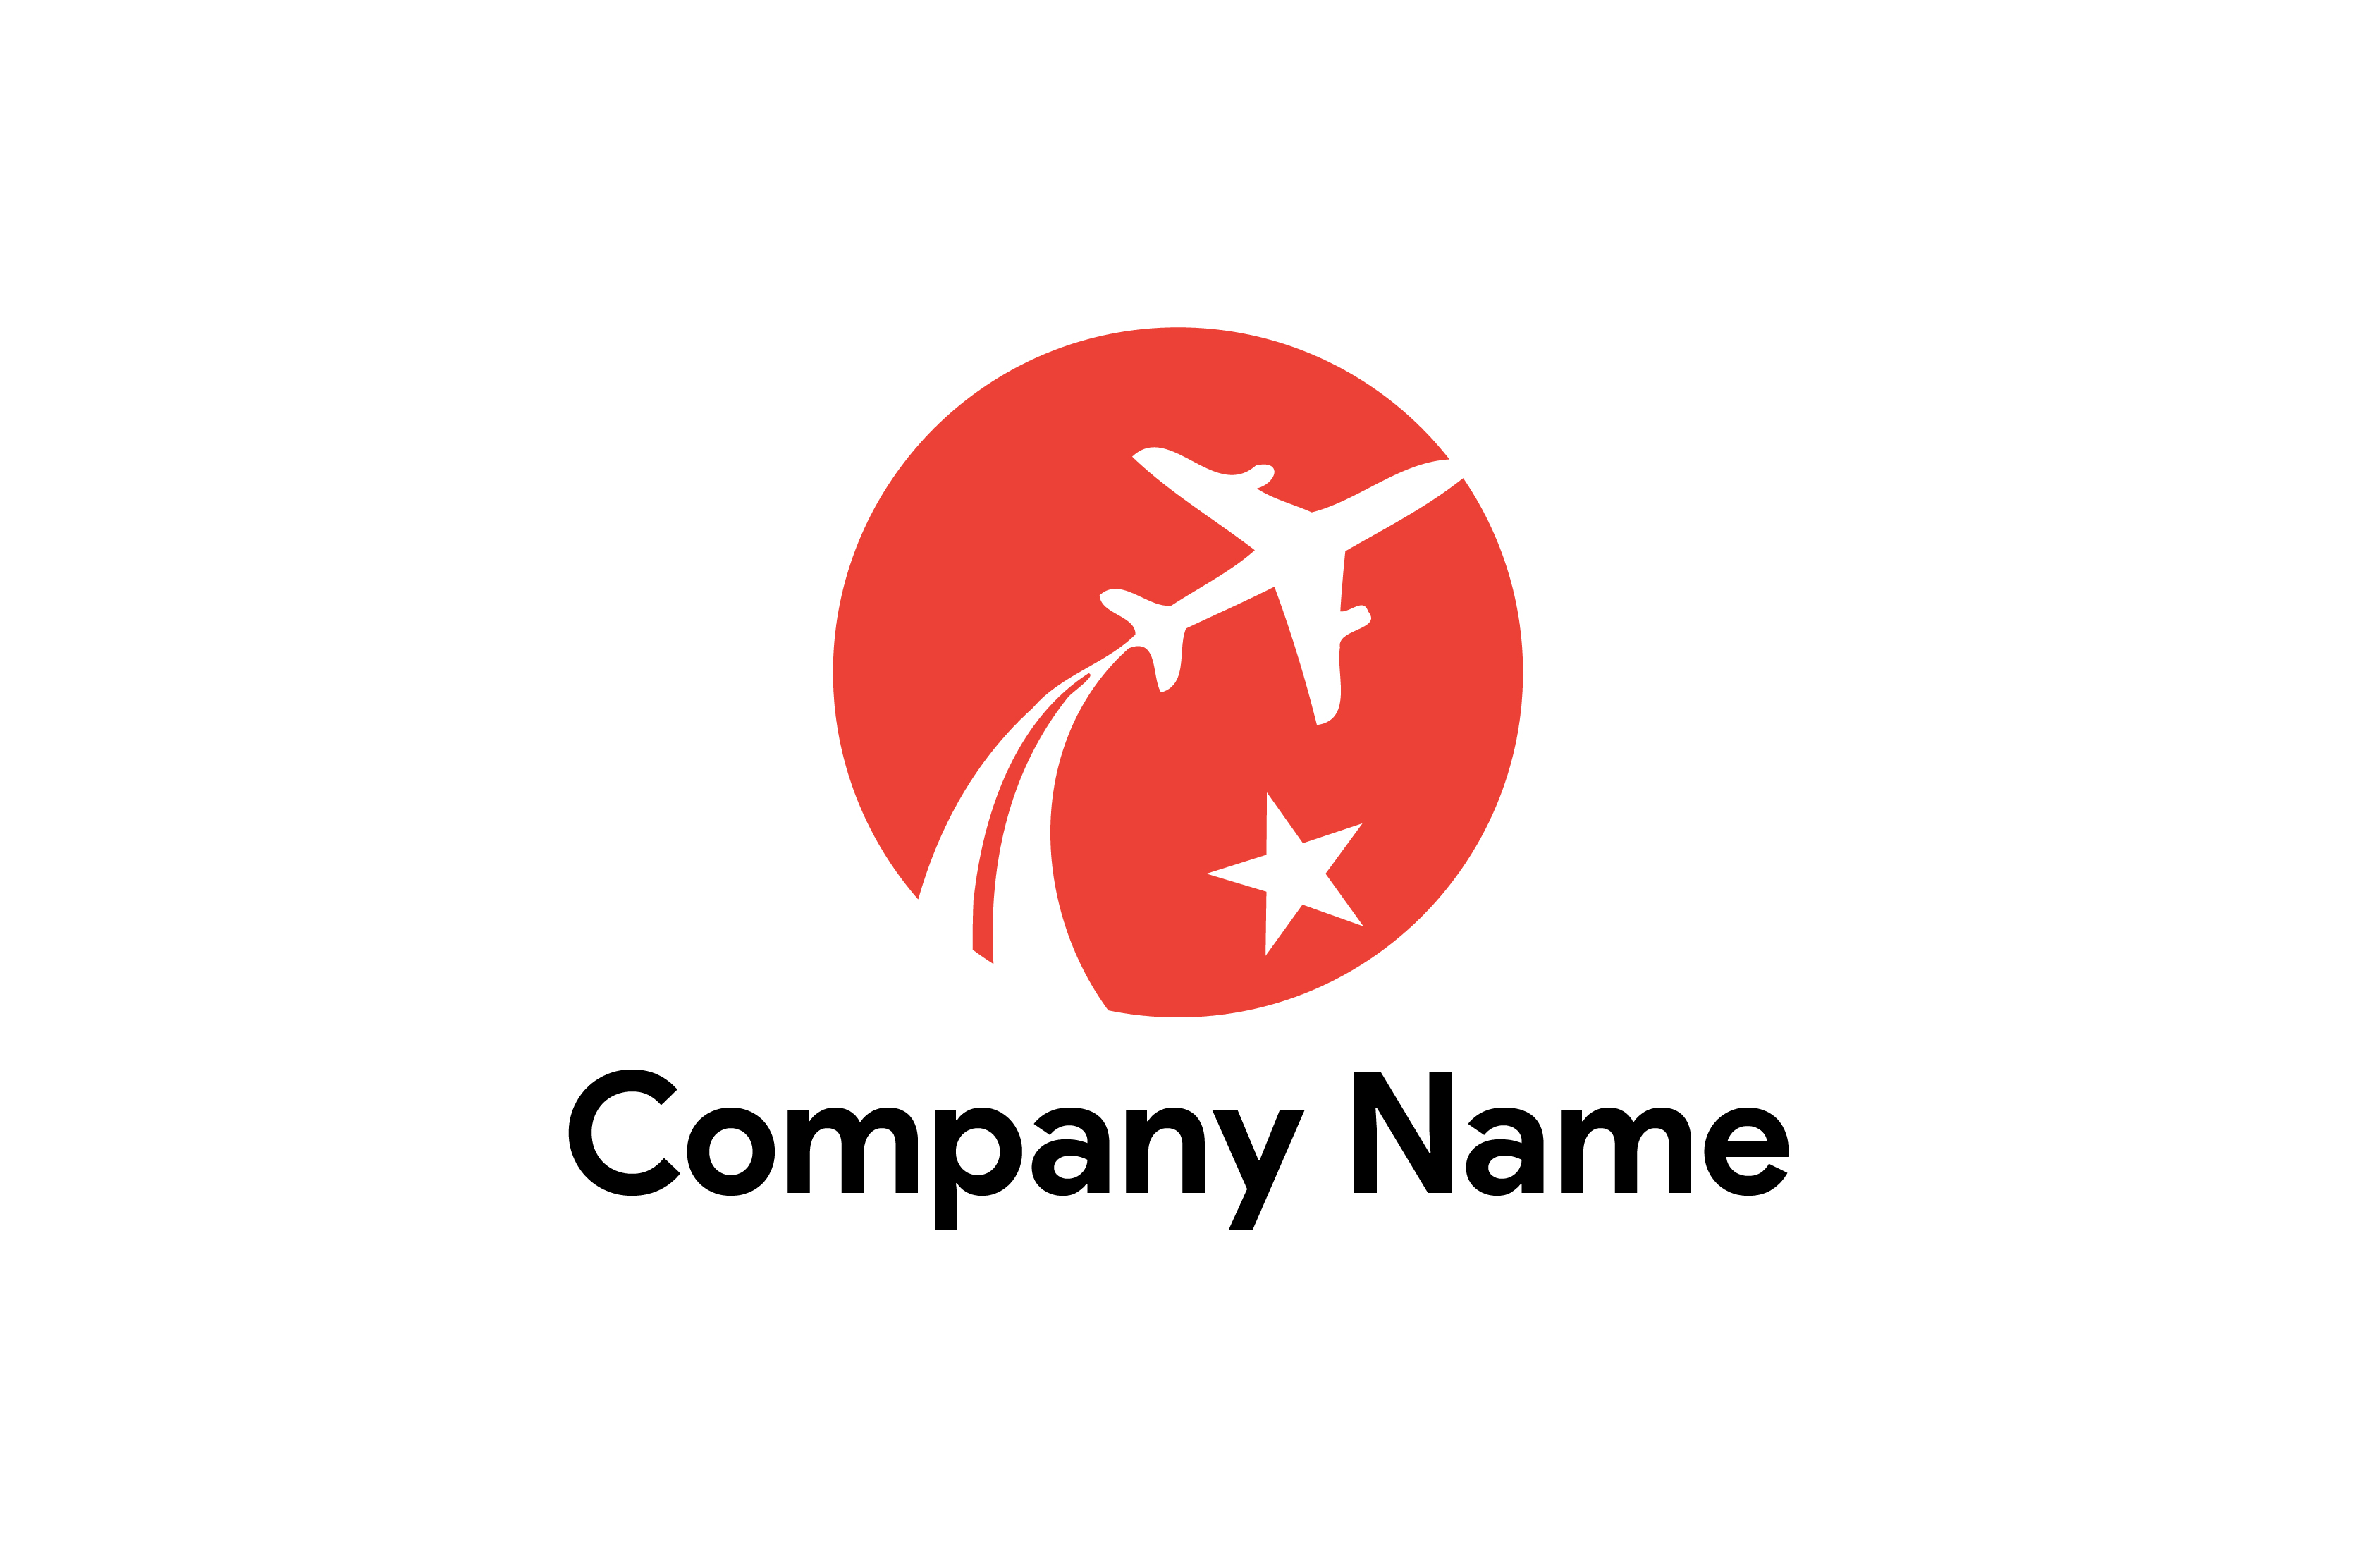 Red and white logo with an airplane flying in the sky.